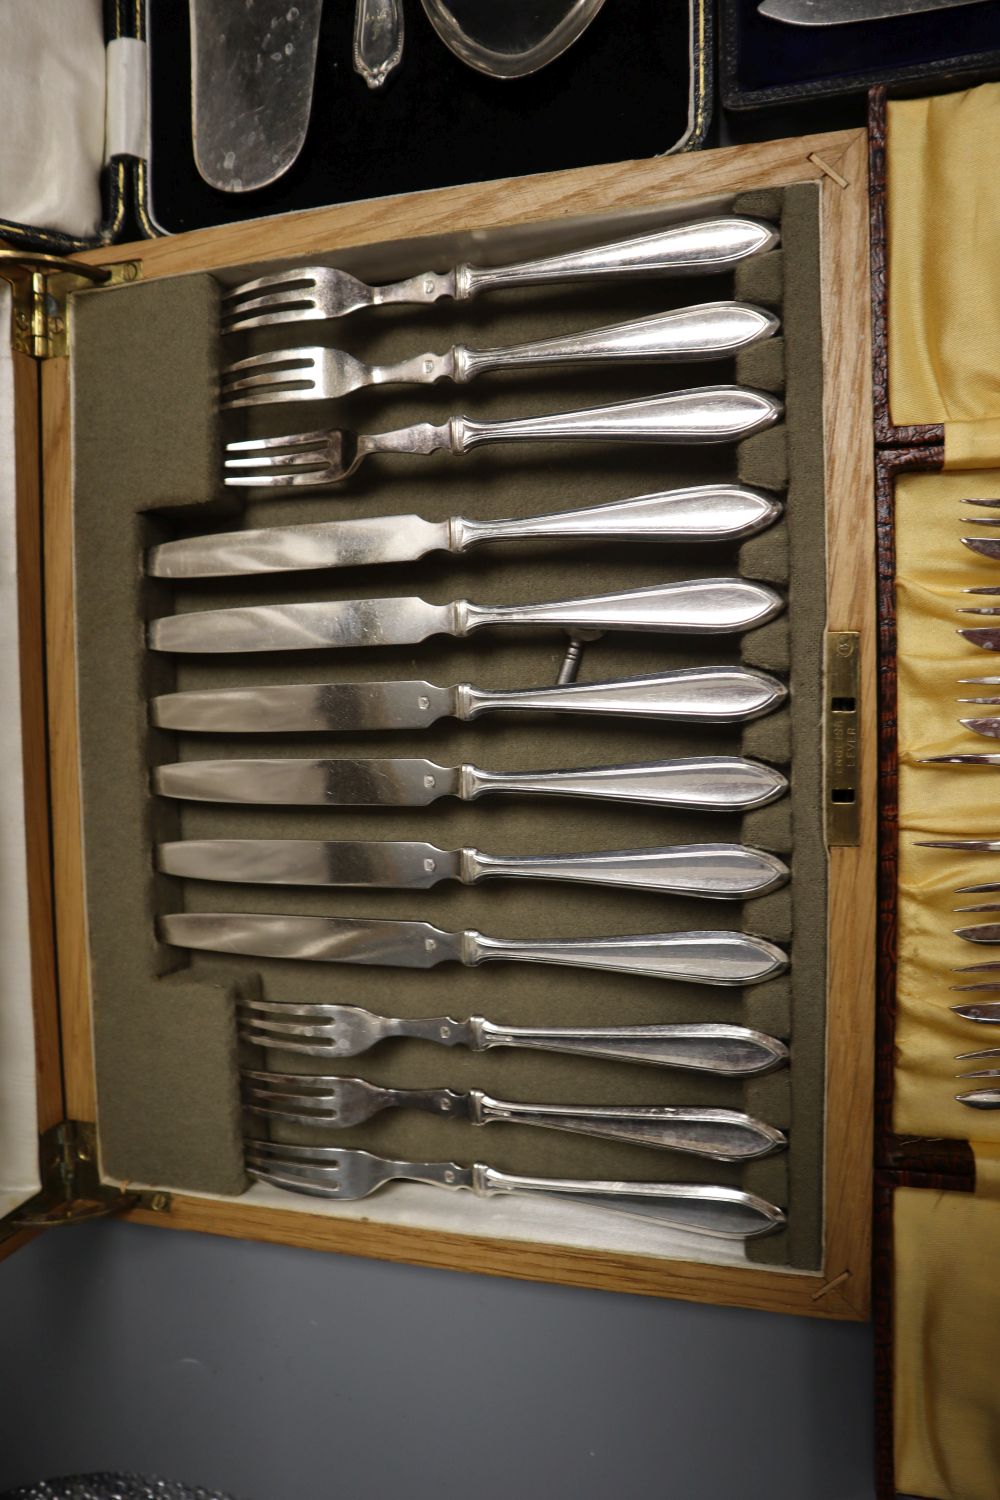 Five cases of plated cutlery.